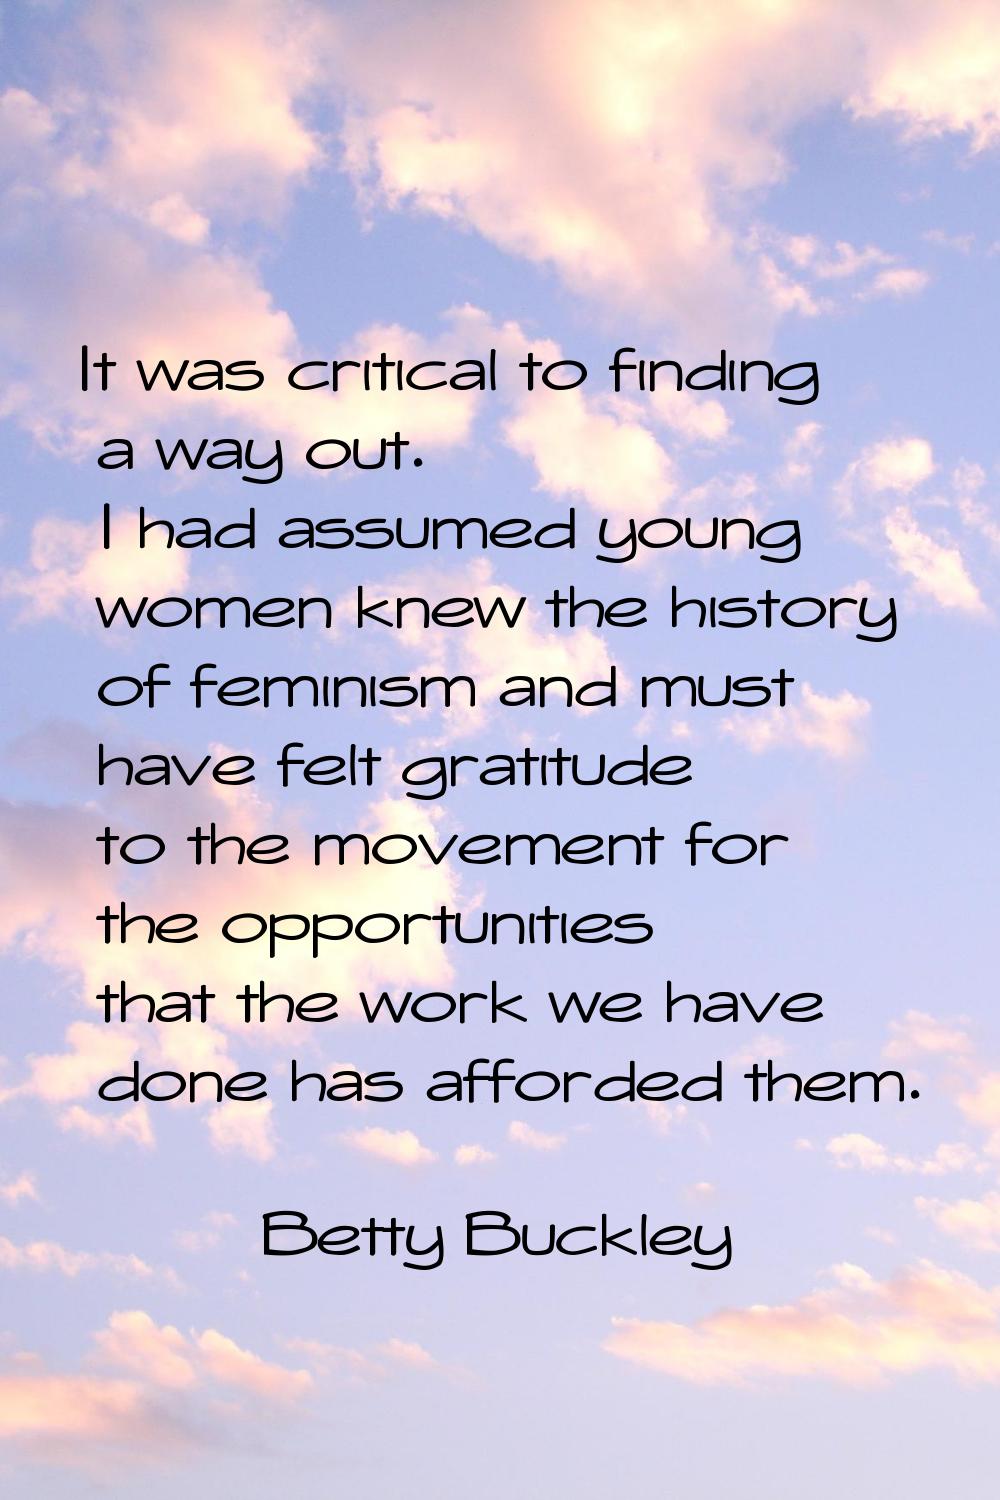 It was critical to finding a way out. I had assumed young women knew the history of feminism and mu